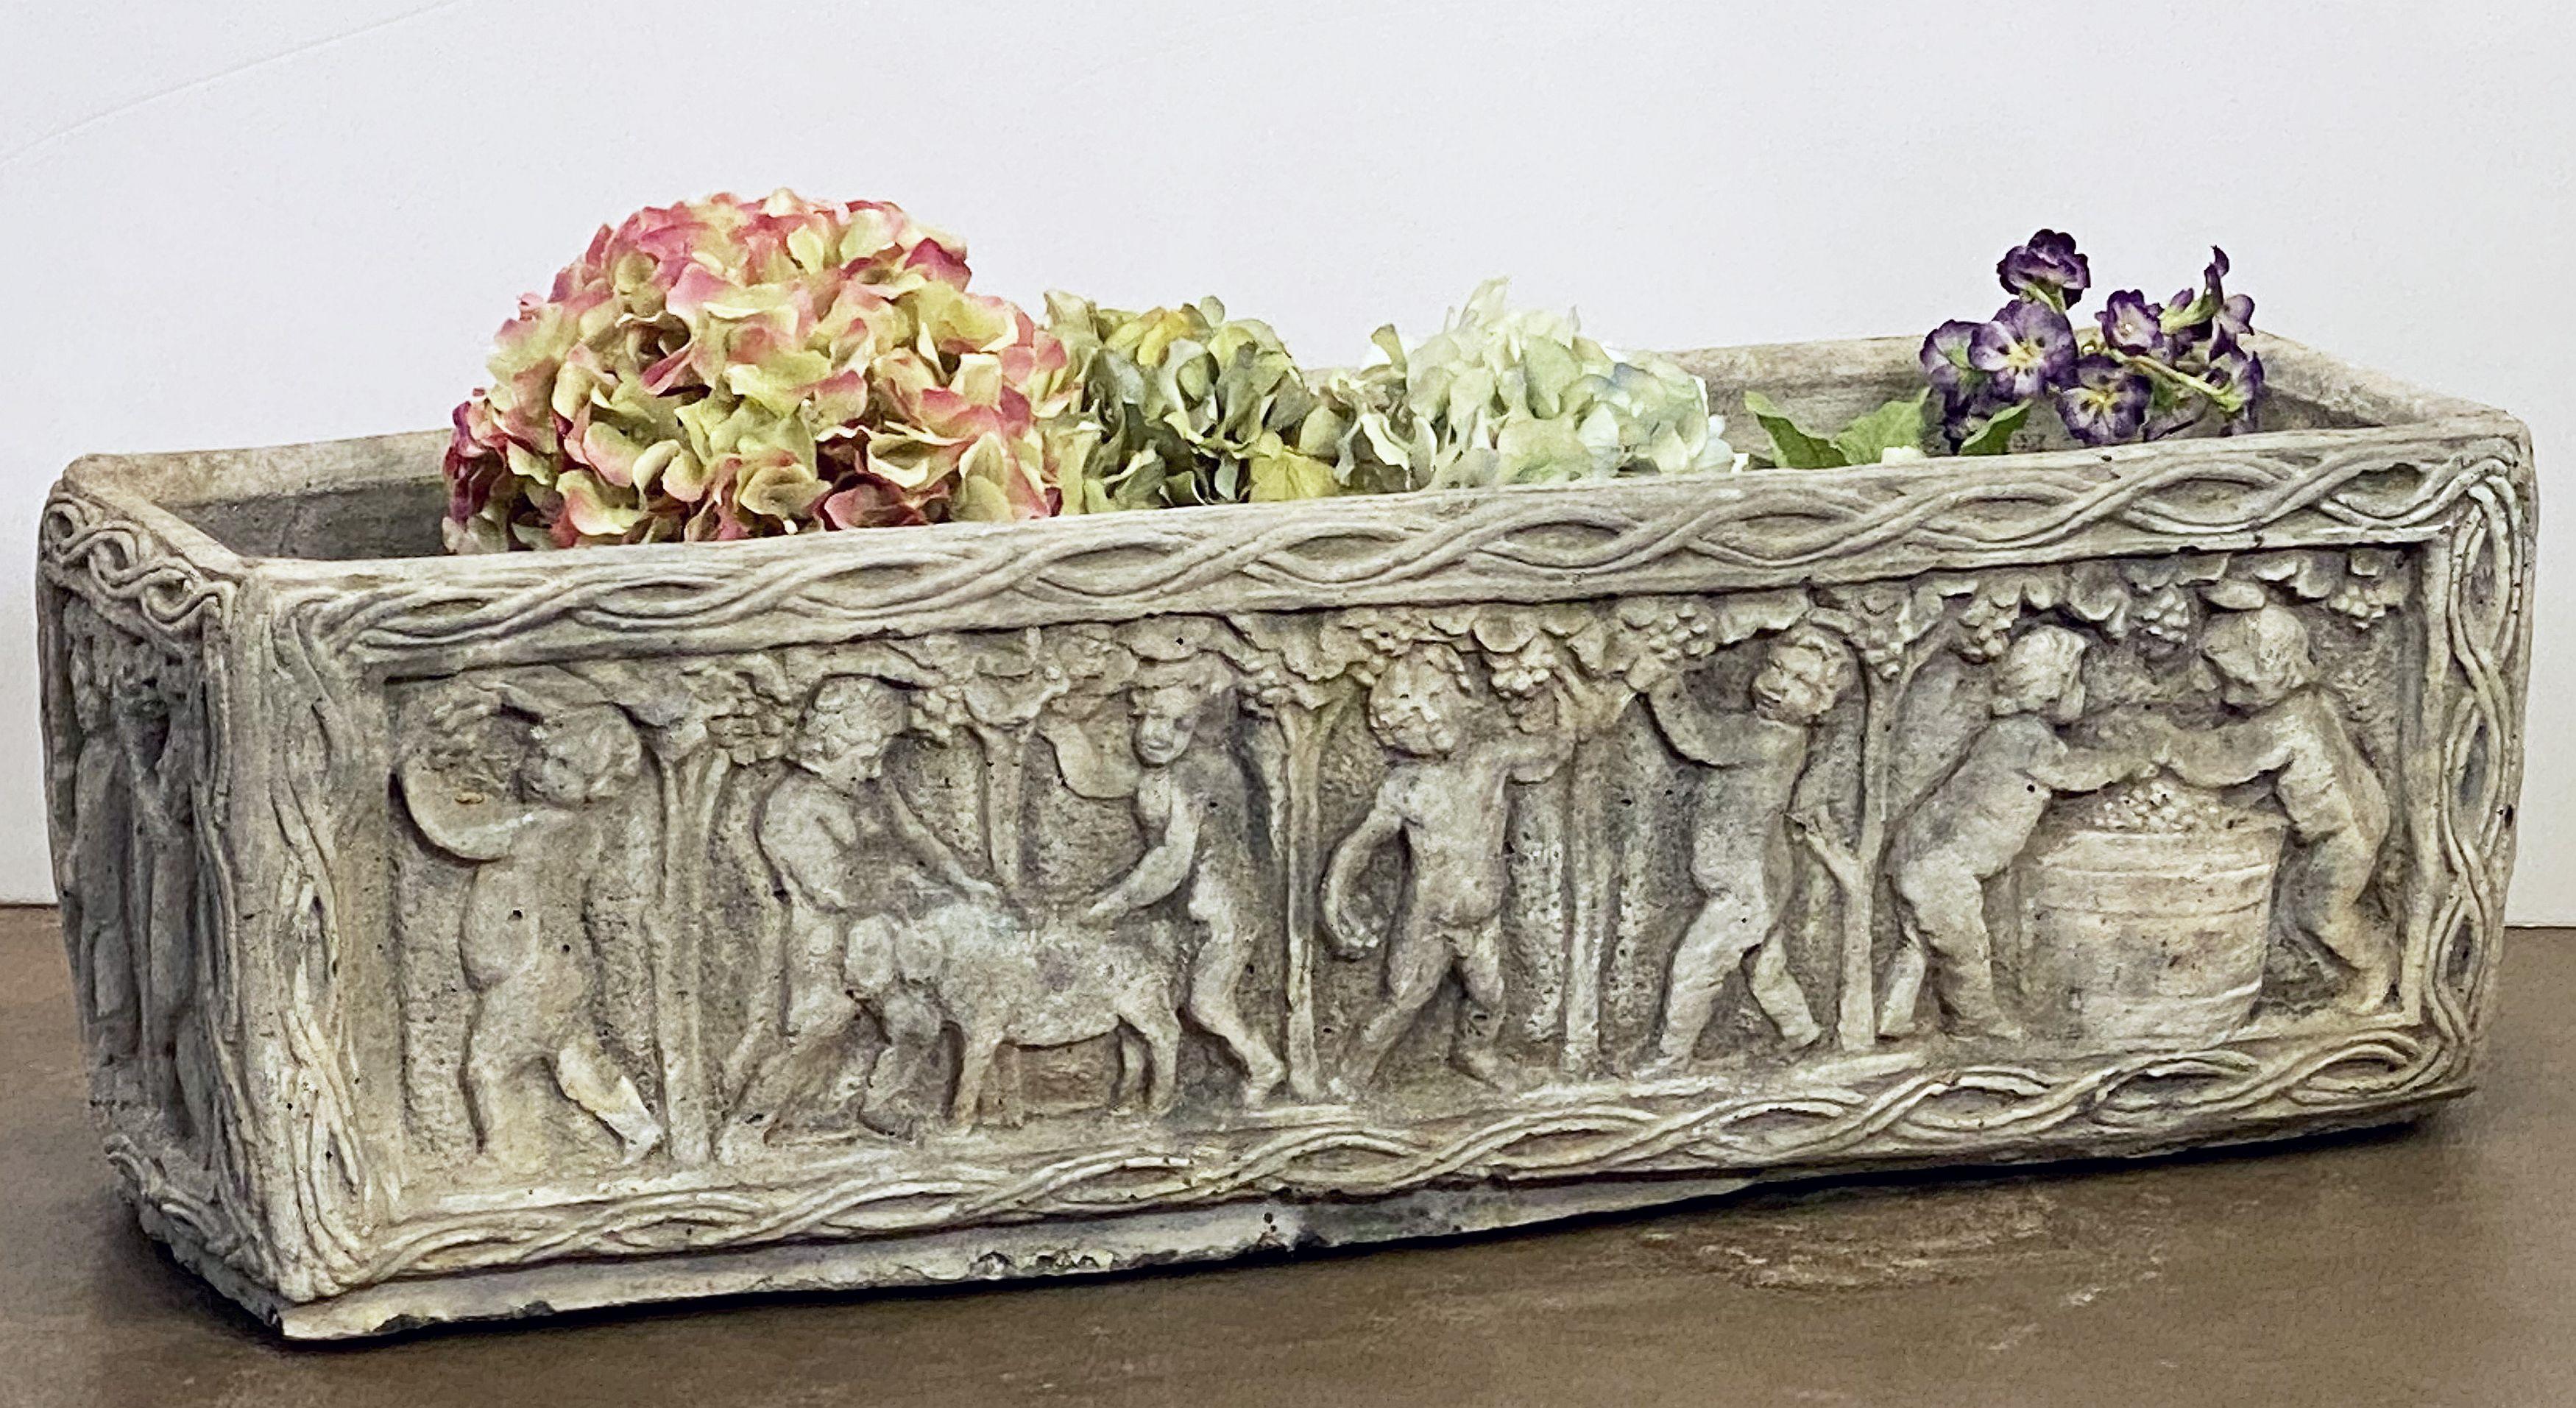 A fine English rectangular garden trough of planter with an ornamental Classical relief of cherubs on all four sides.